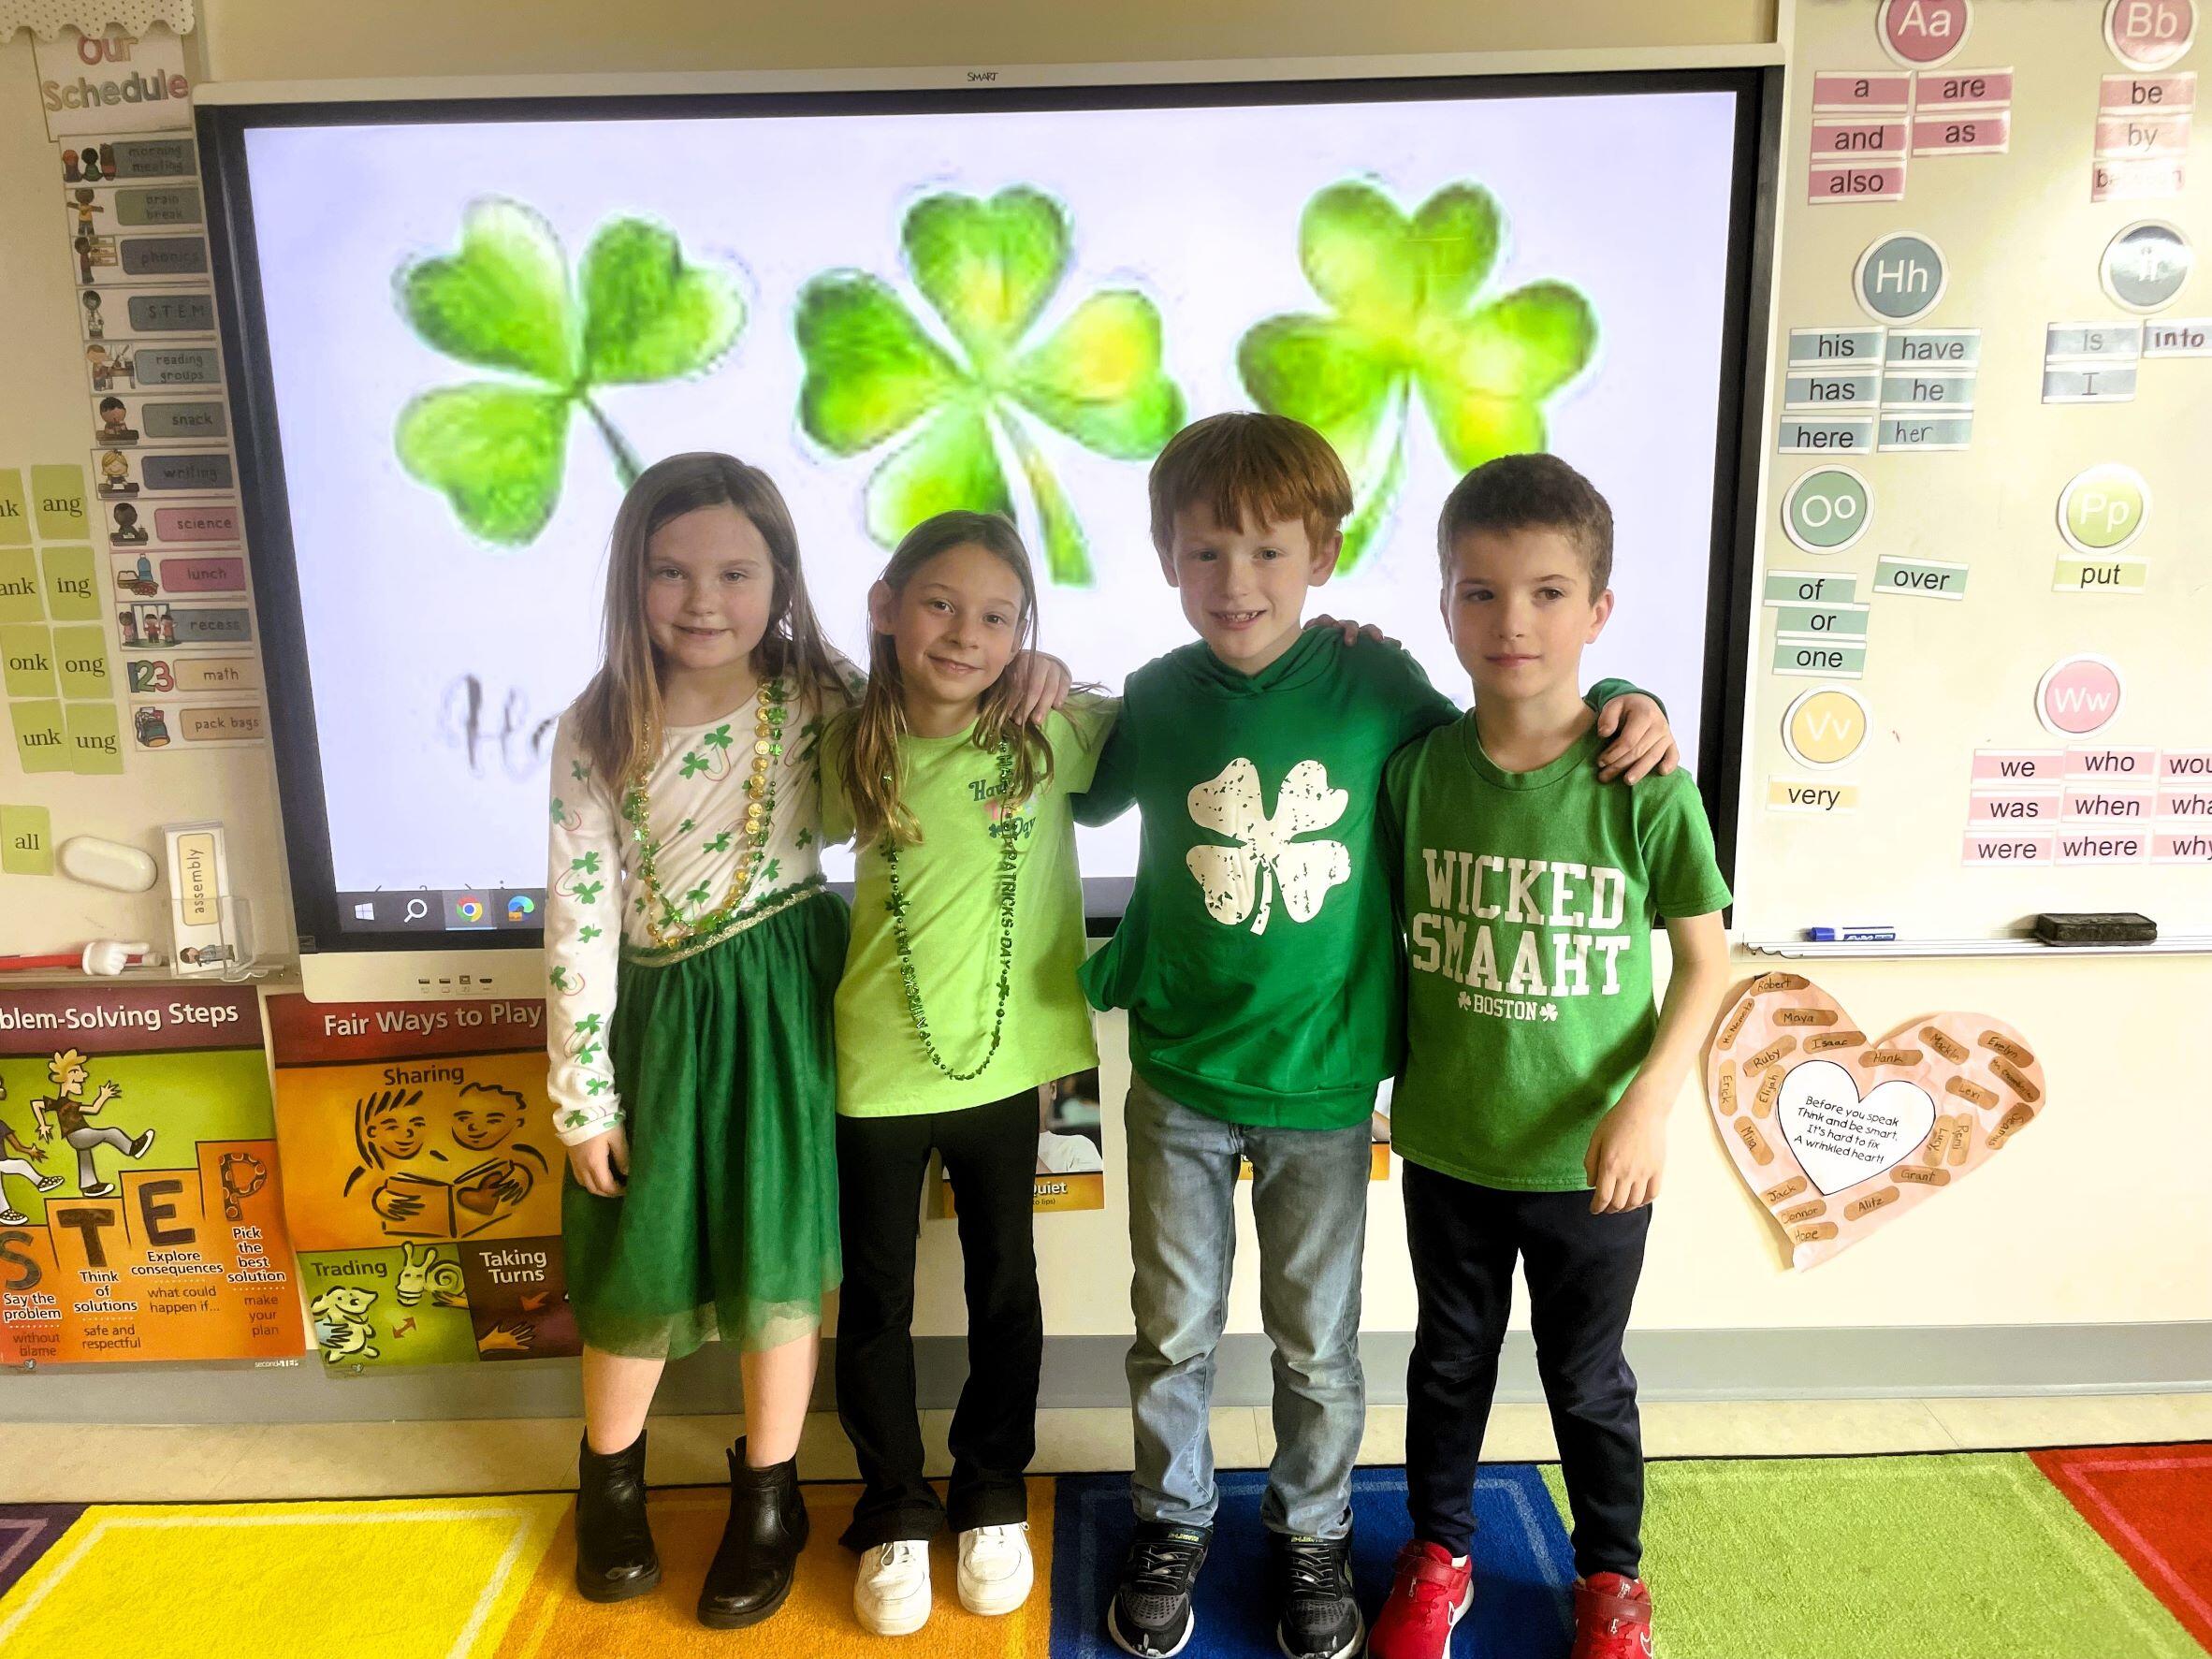 Four students wearing green, standing in front of a smartboard. On the smartboard are shamrocks